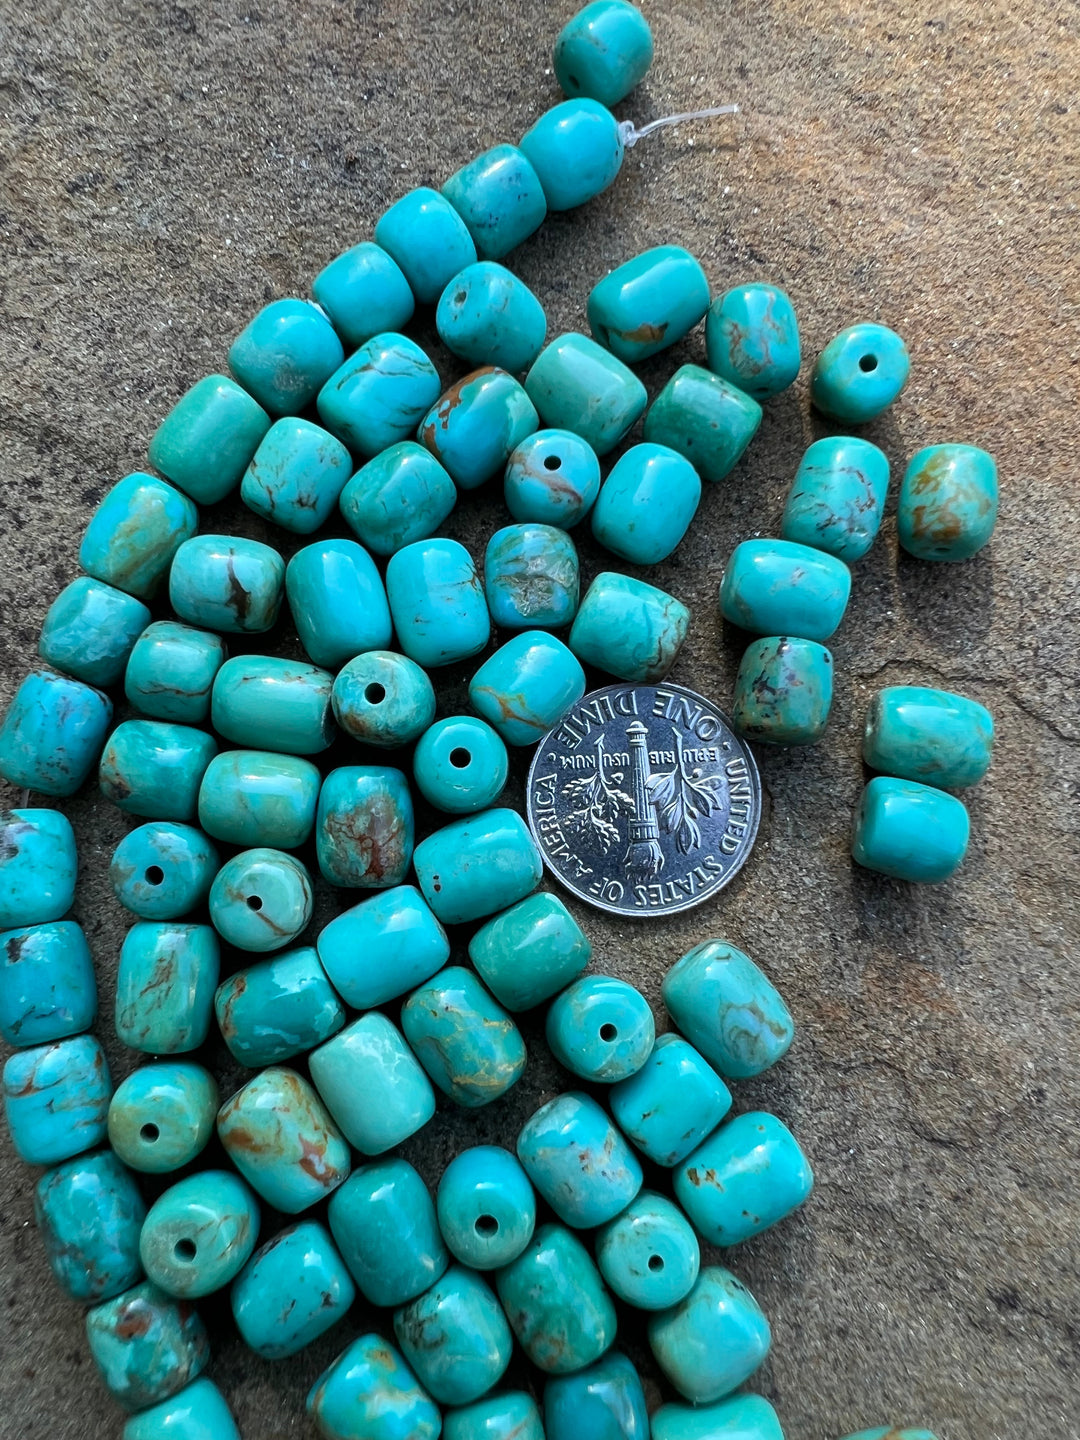 Chilean Turquoise (Chile) 7x8mm Barrel Beads Package of 5